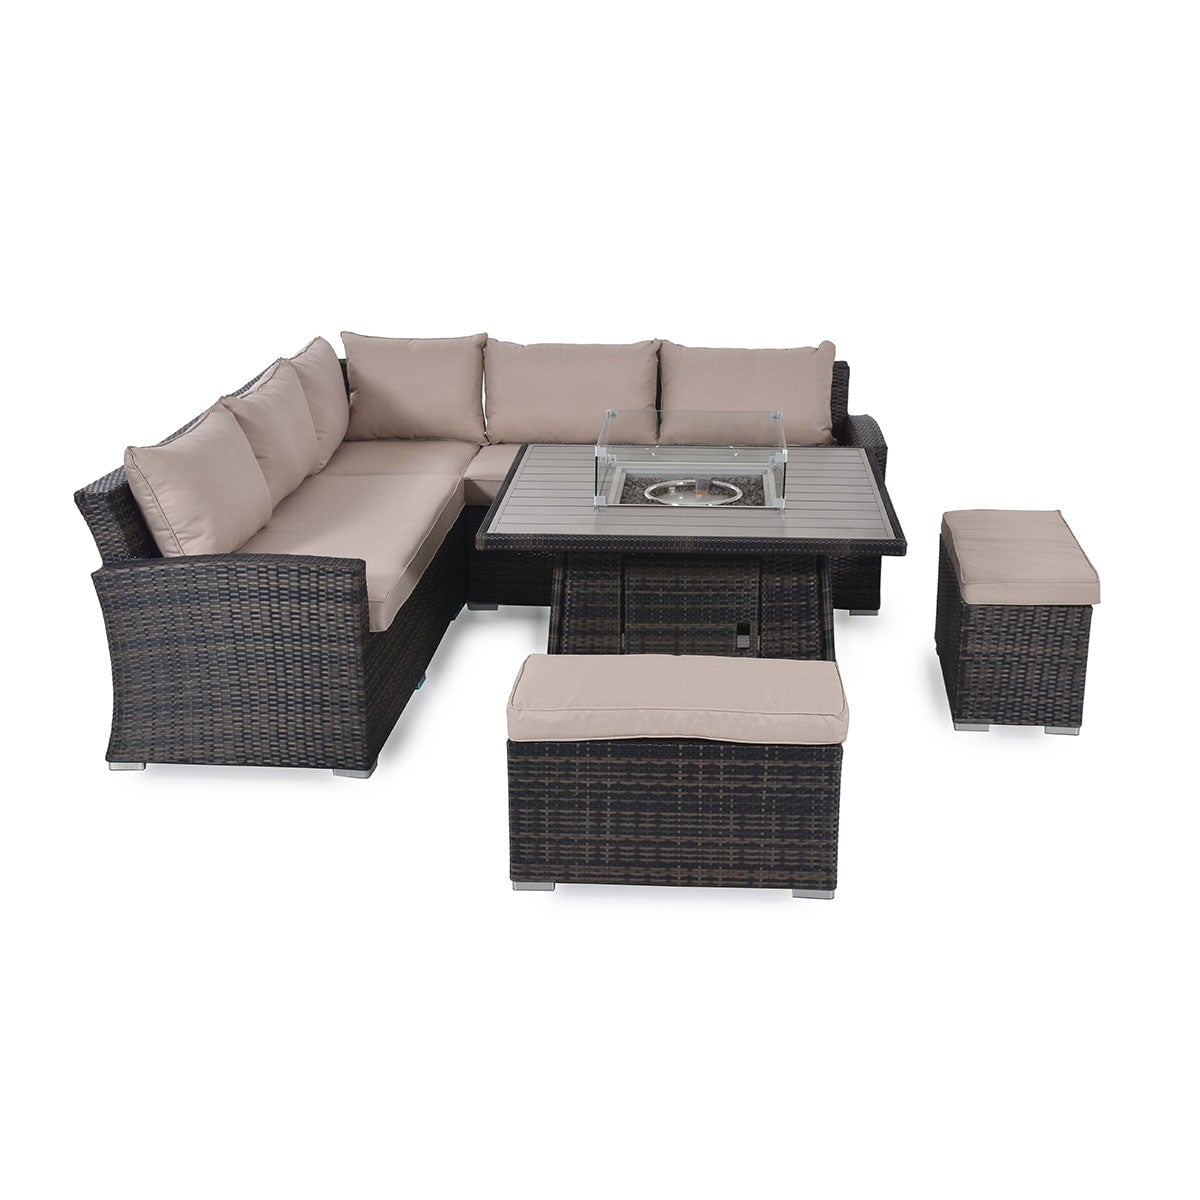 Kingston Corner Deluxe Dining Set with Fire Pit
(aluminium slatted top
includes glass surround, metal lid, firestones) | Brown  | Flat Weave